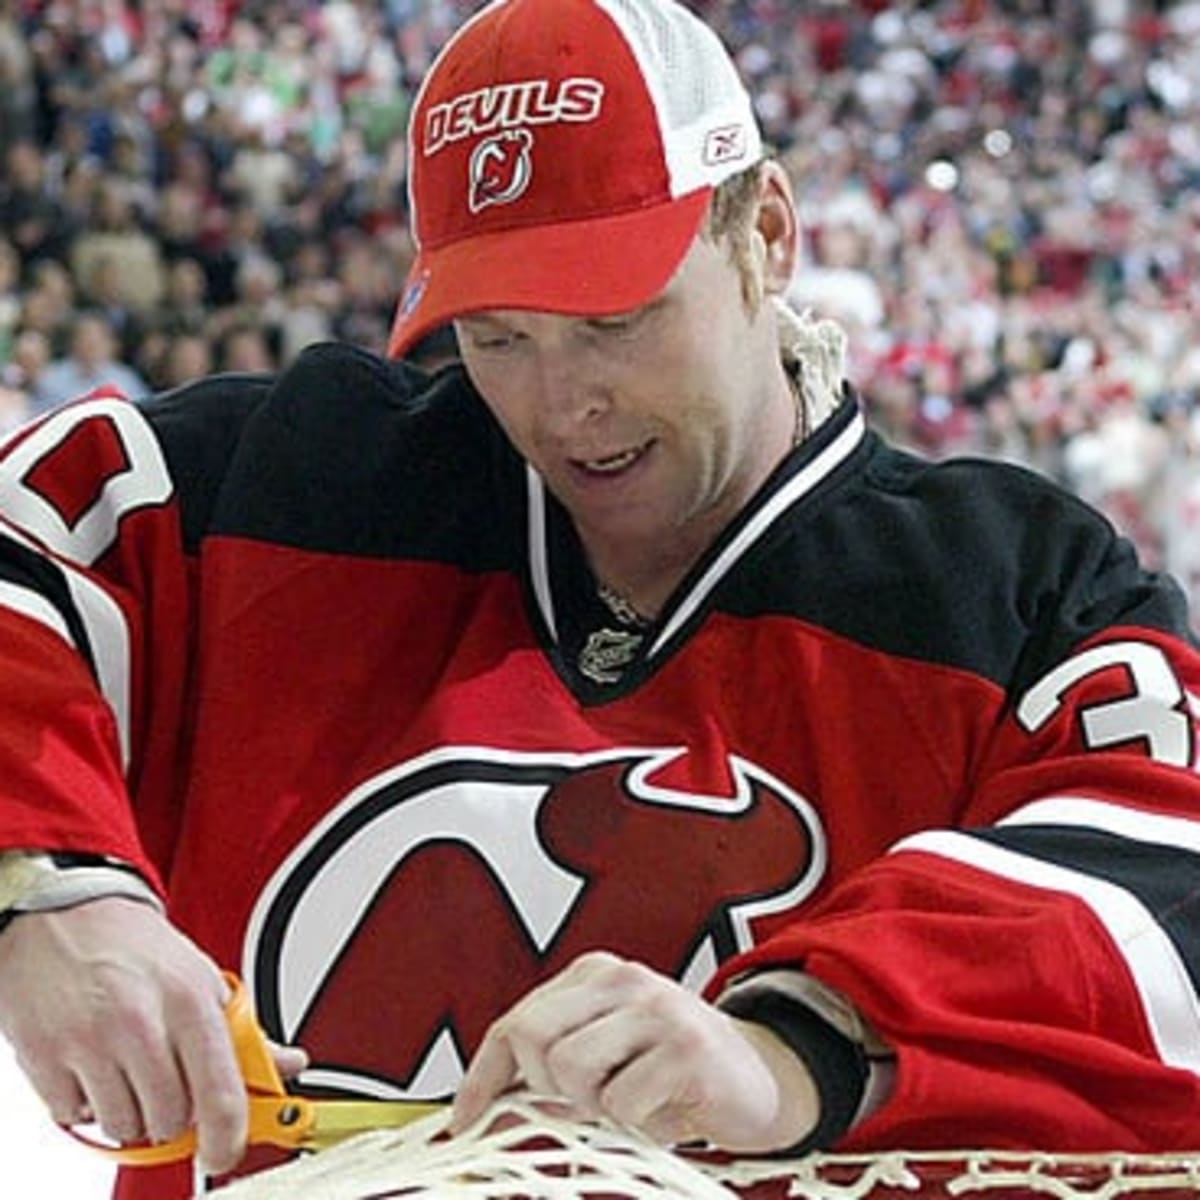 1990's Goaltending: Brodeur vs Hextall - All About The Jersey